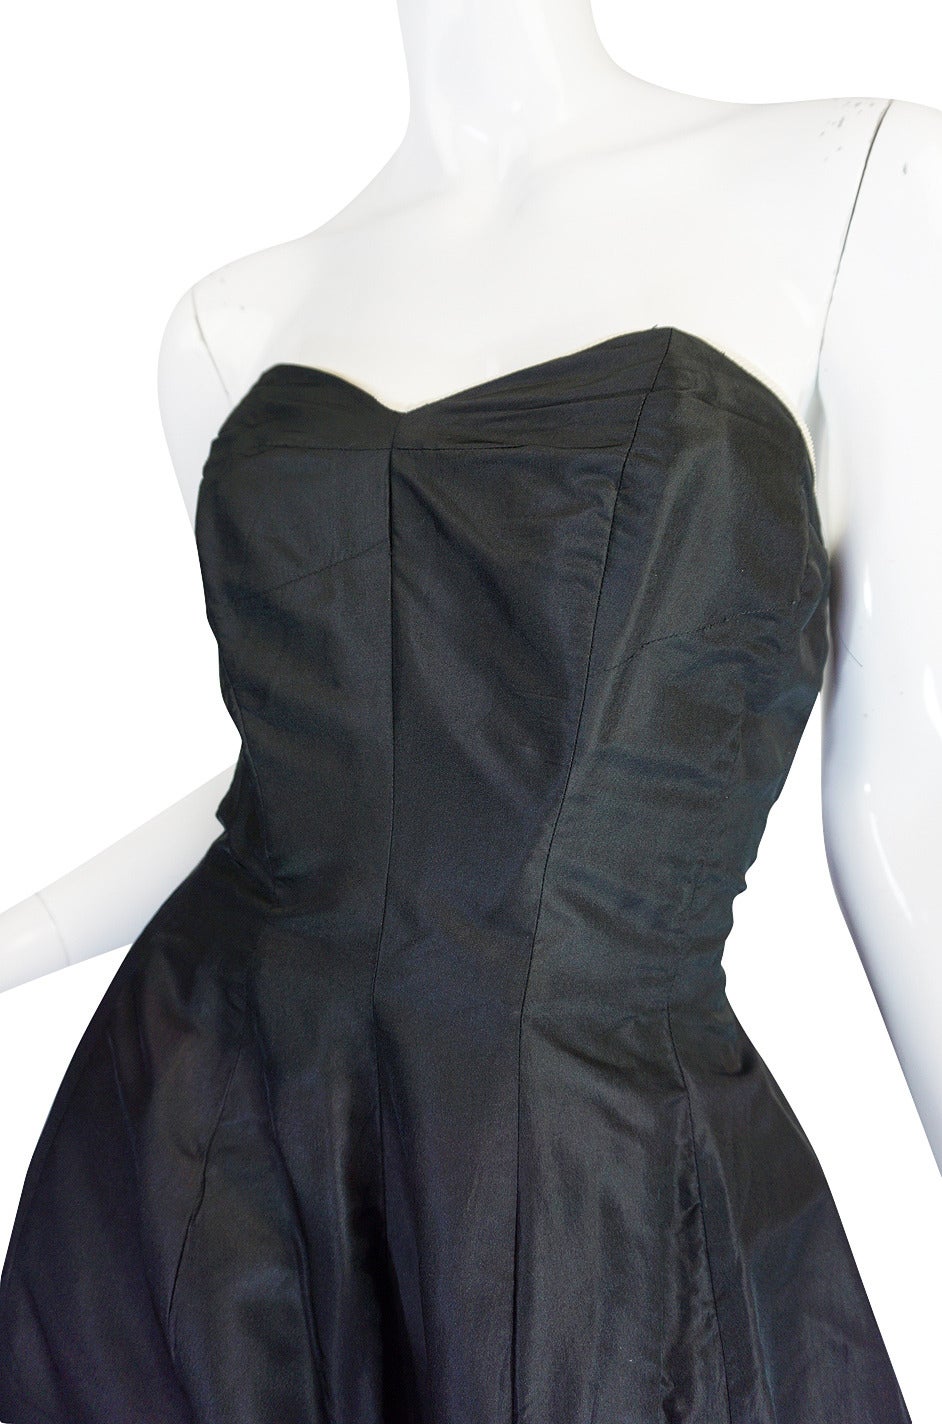 Beautiful 1950s Black Strapless Bonwit Teller Silk Gown For Sale 5